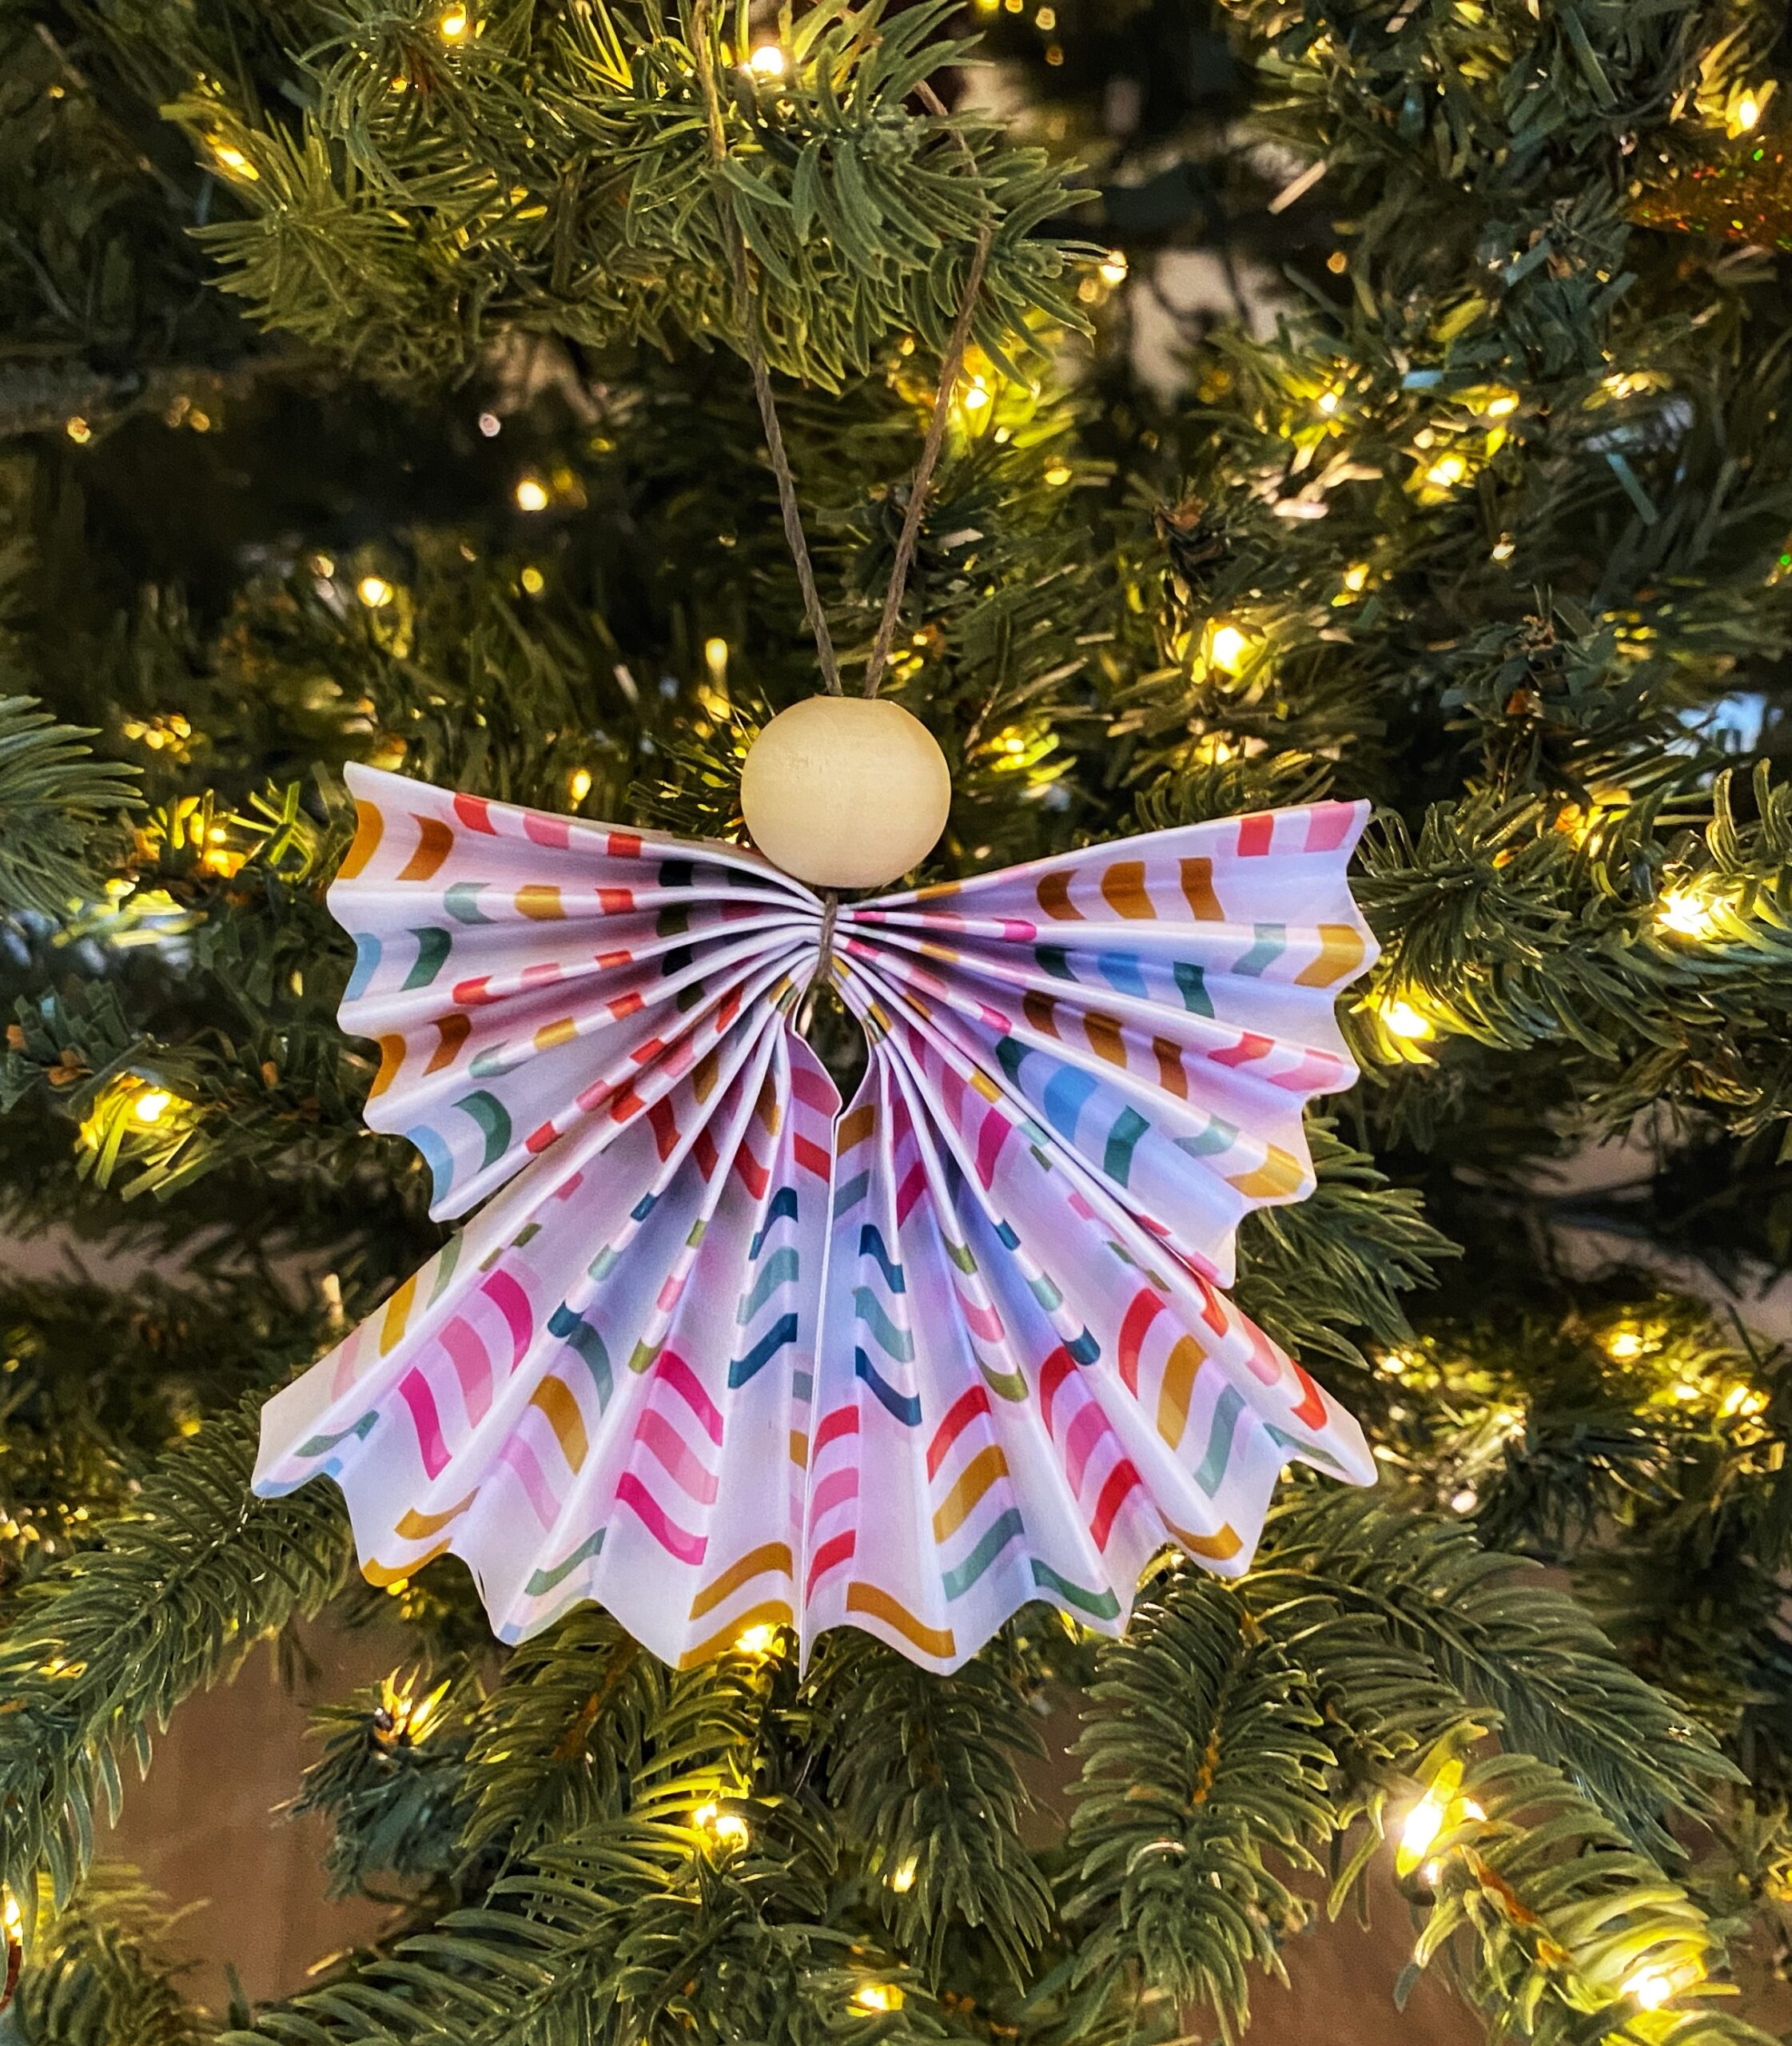 Leftover Paper Angel Ornaments - TheDiyRx